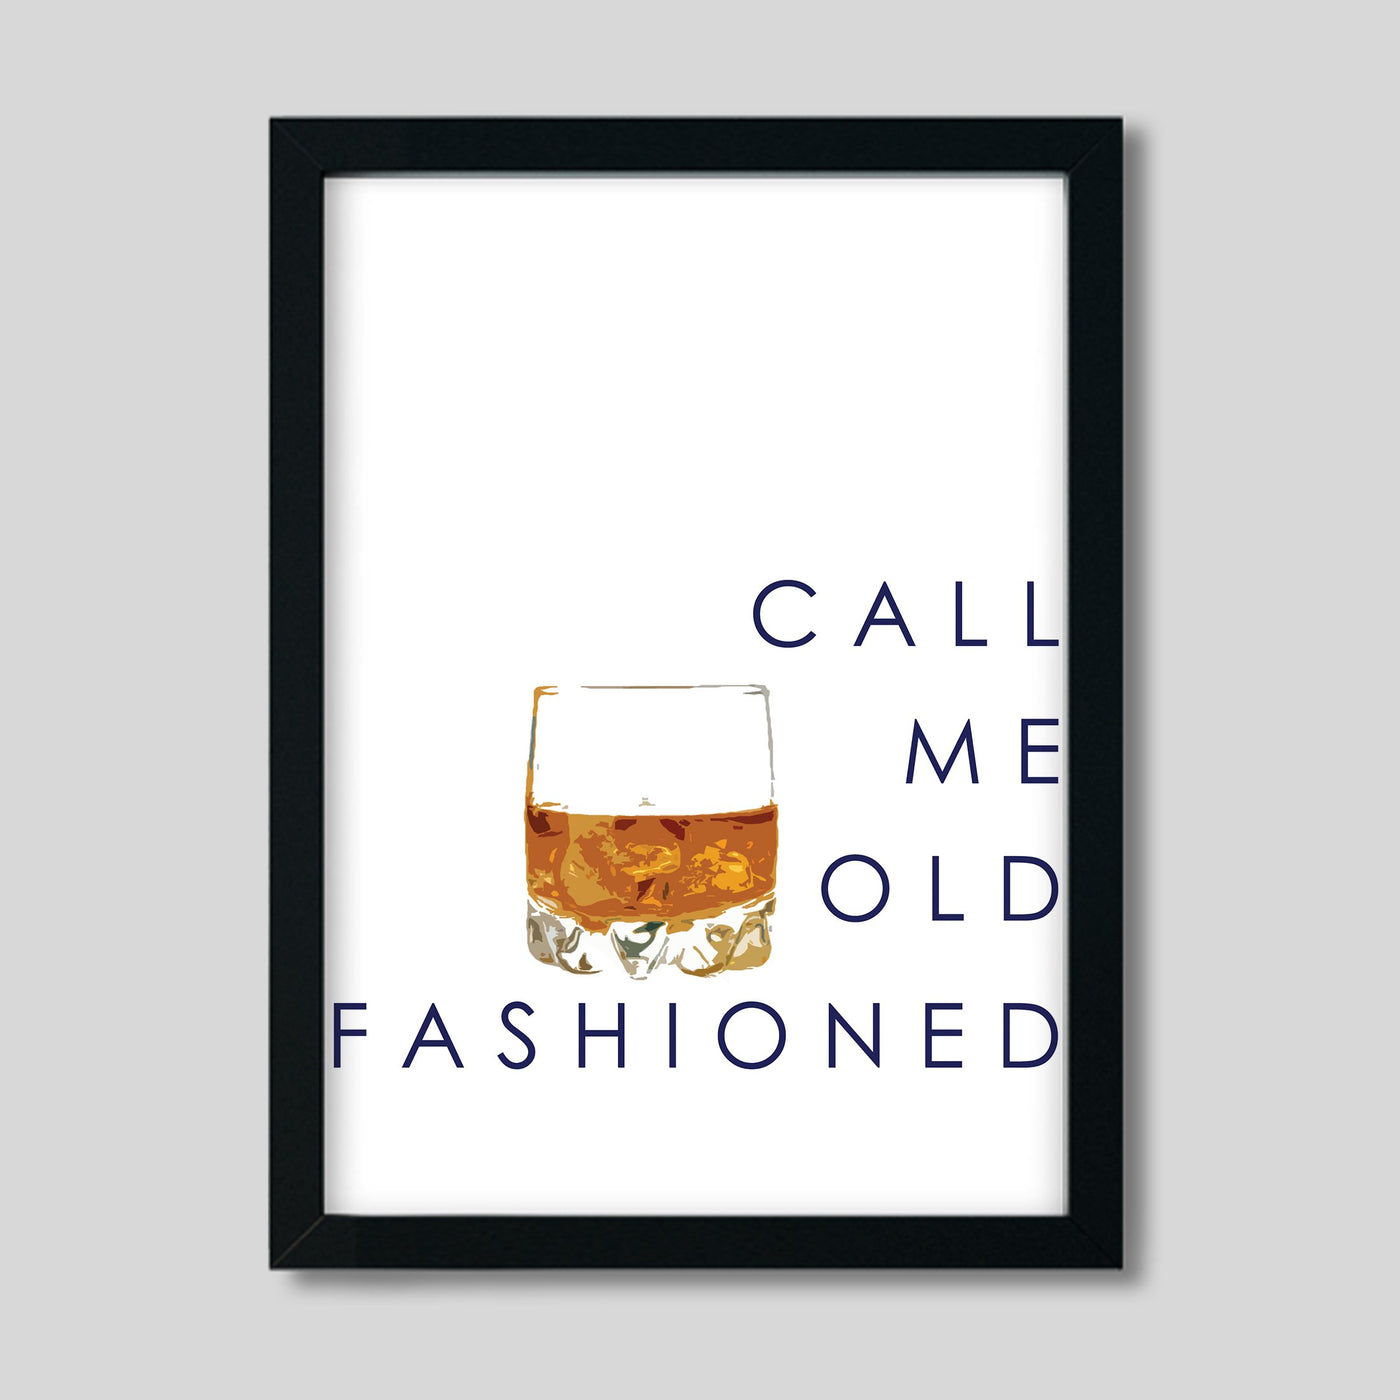 Gallery Prints 8x10 / black frame Call Me Old Fashioned Print Katie Kime